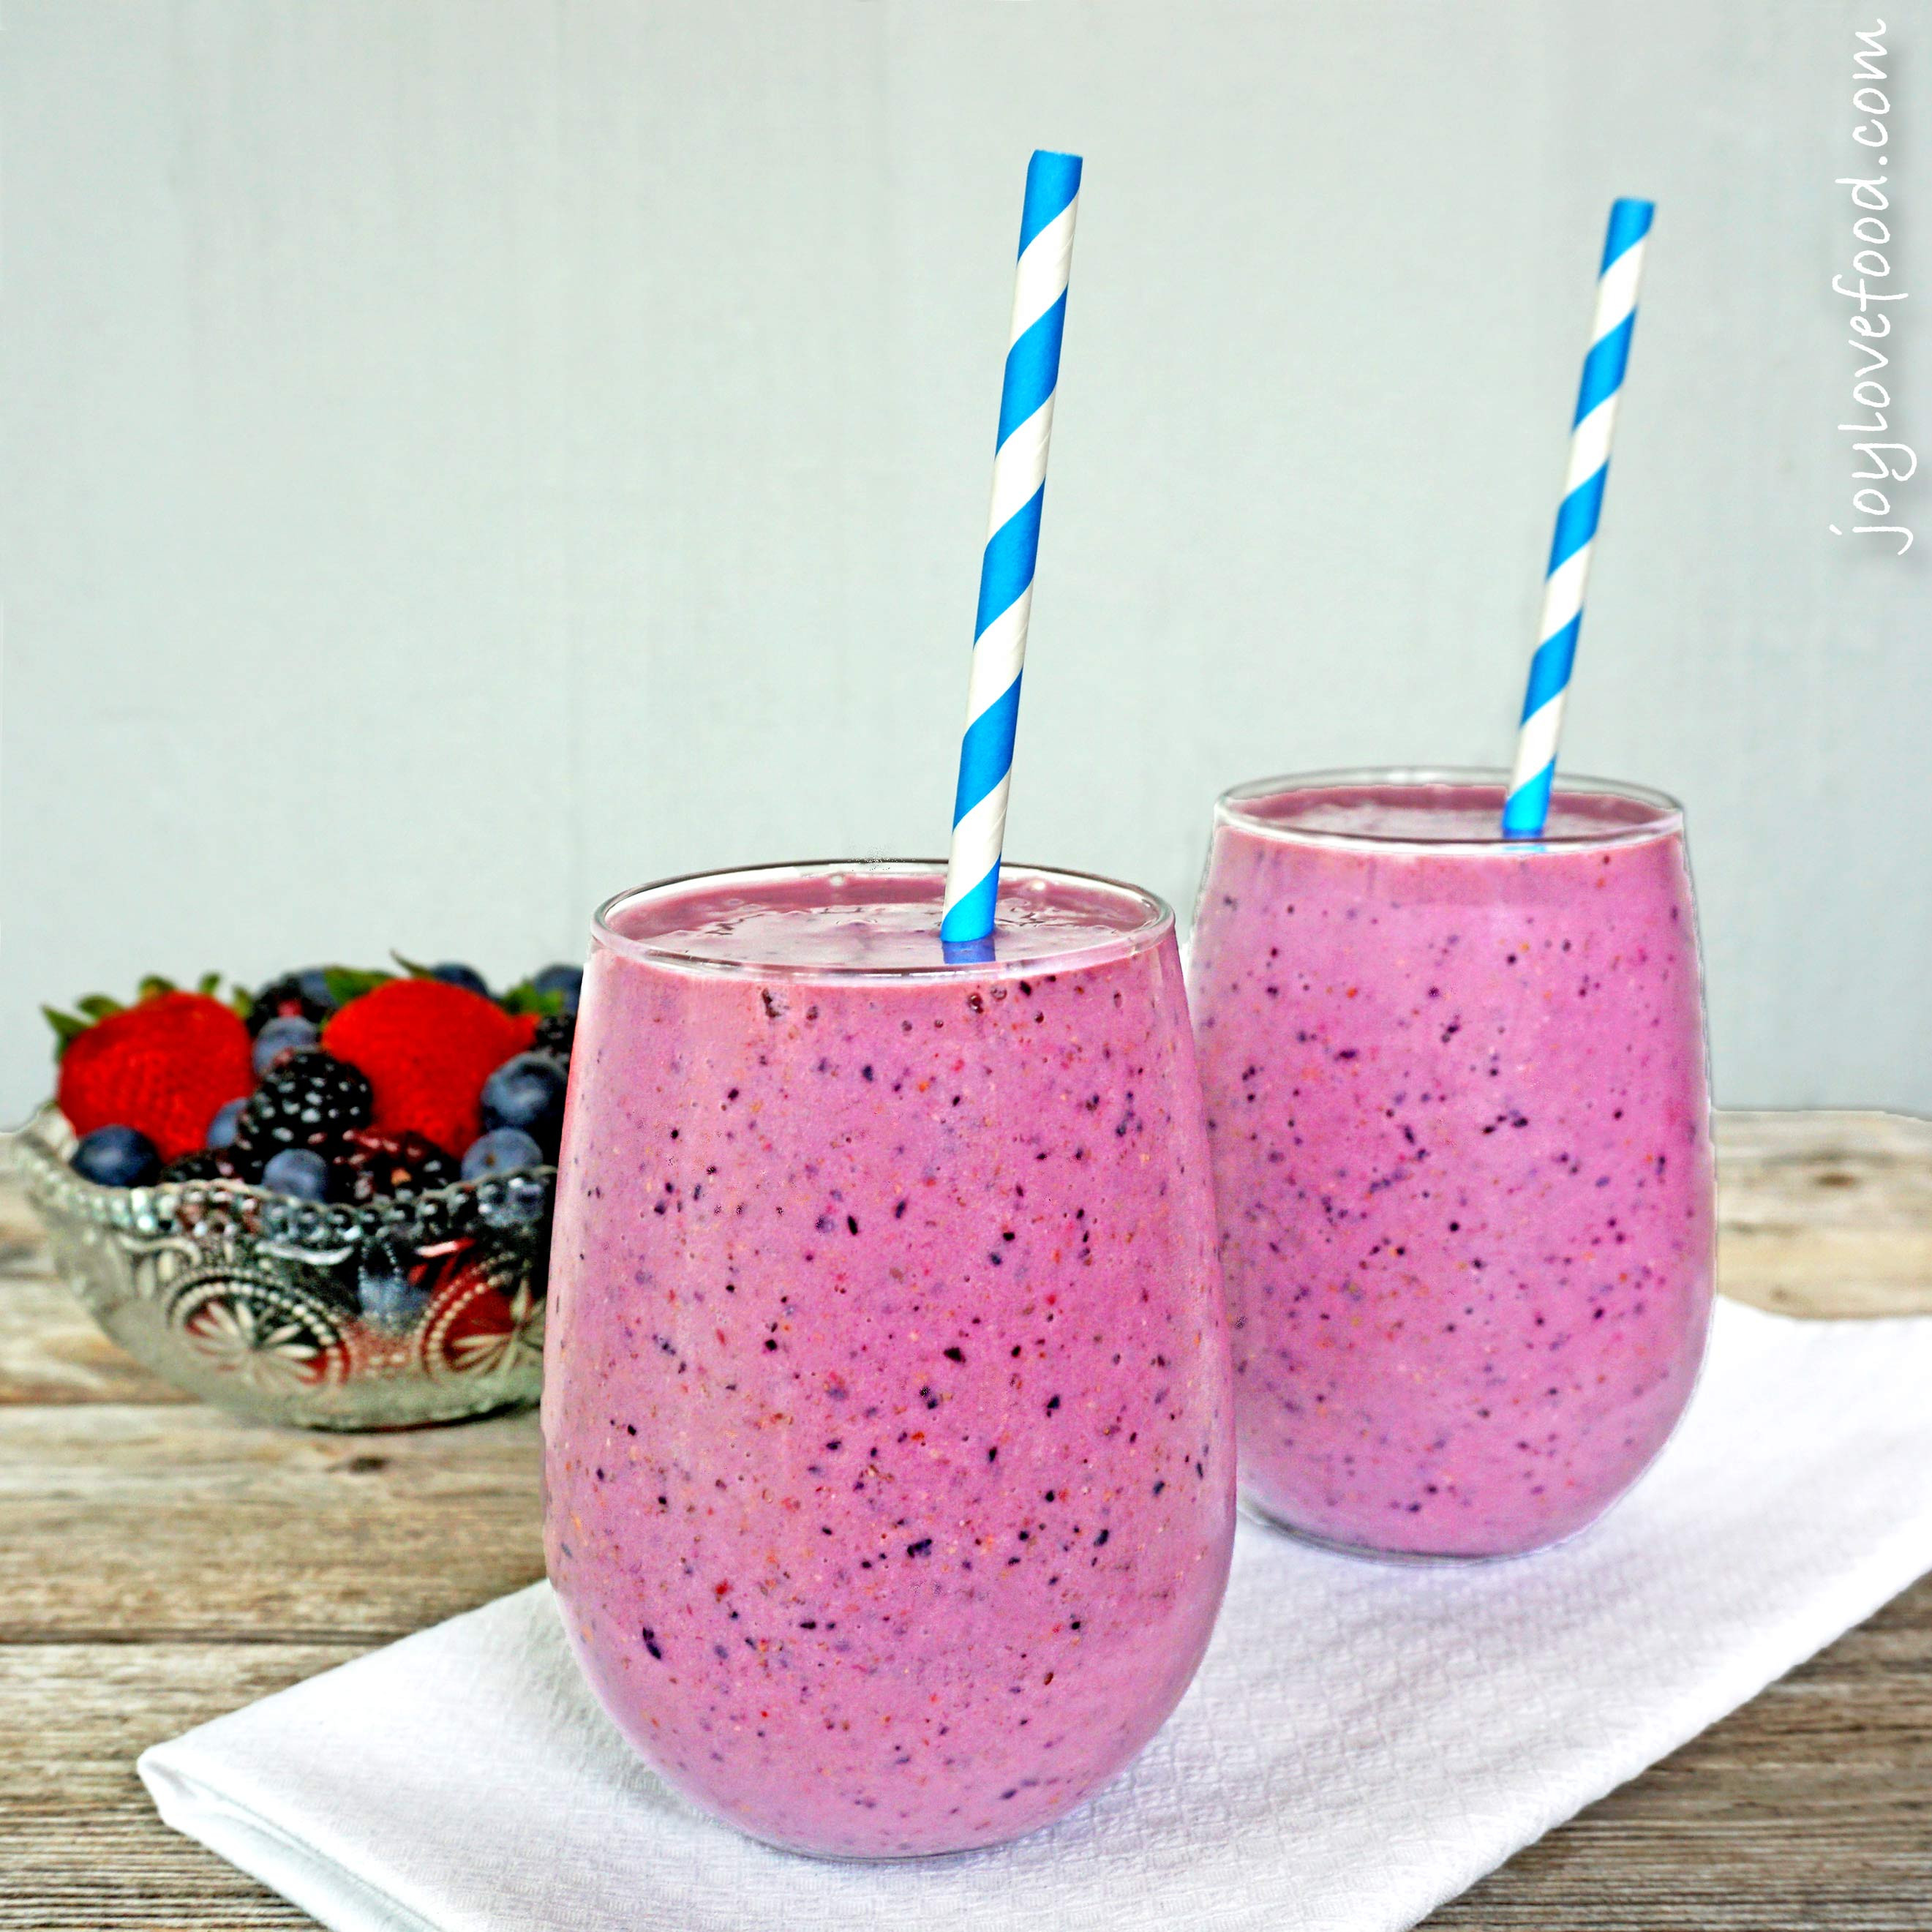 Healthy Seeds For Smoothies
 Mixed Berry Banana Chia Seed Smoothies Joy Love Food